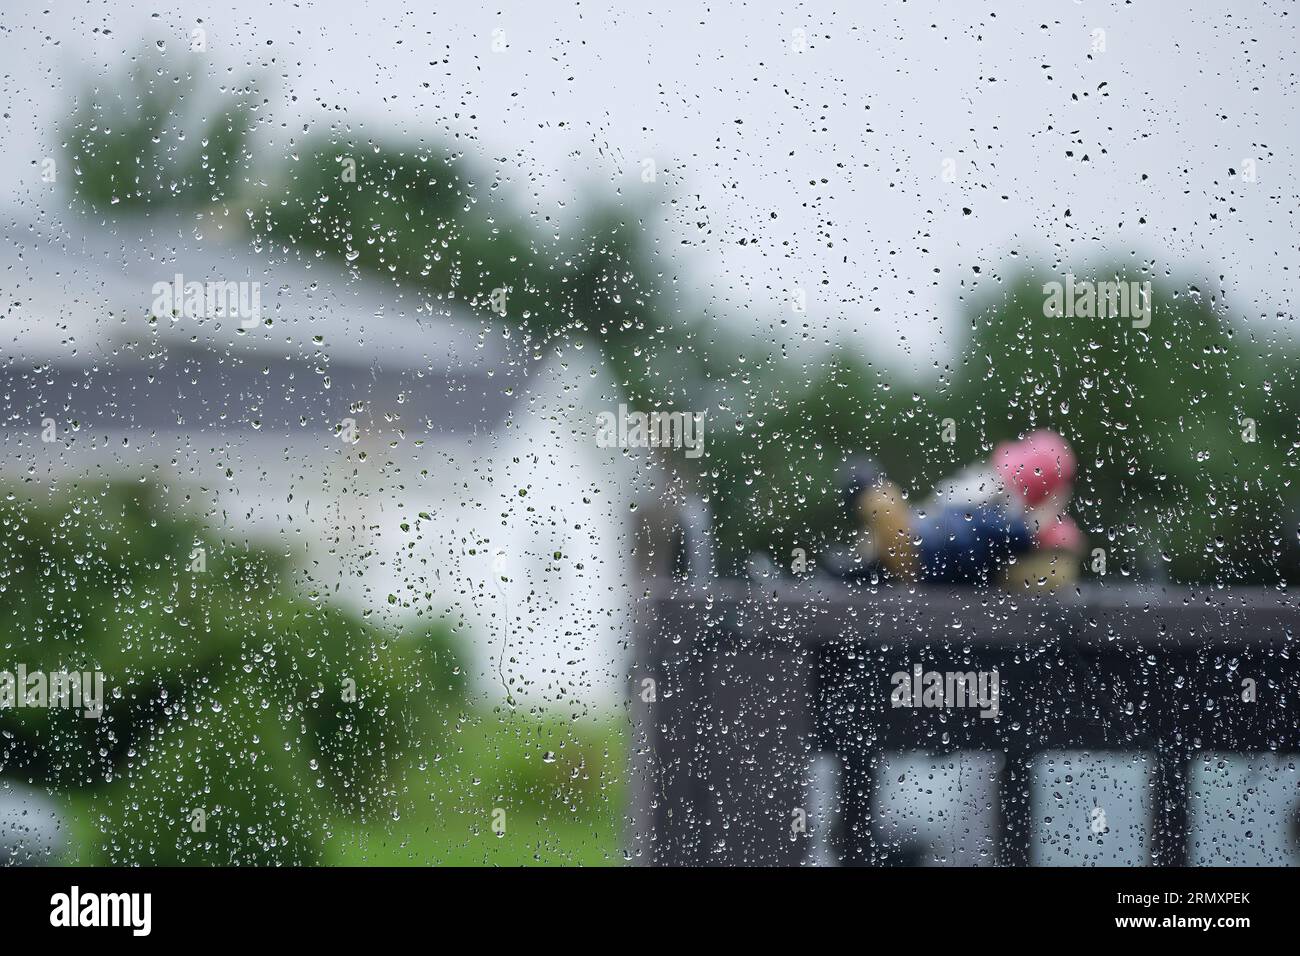 View to the outside on a rainy day with waterdrops on the window. Stock Photo